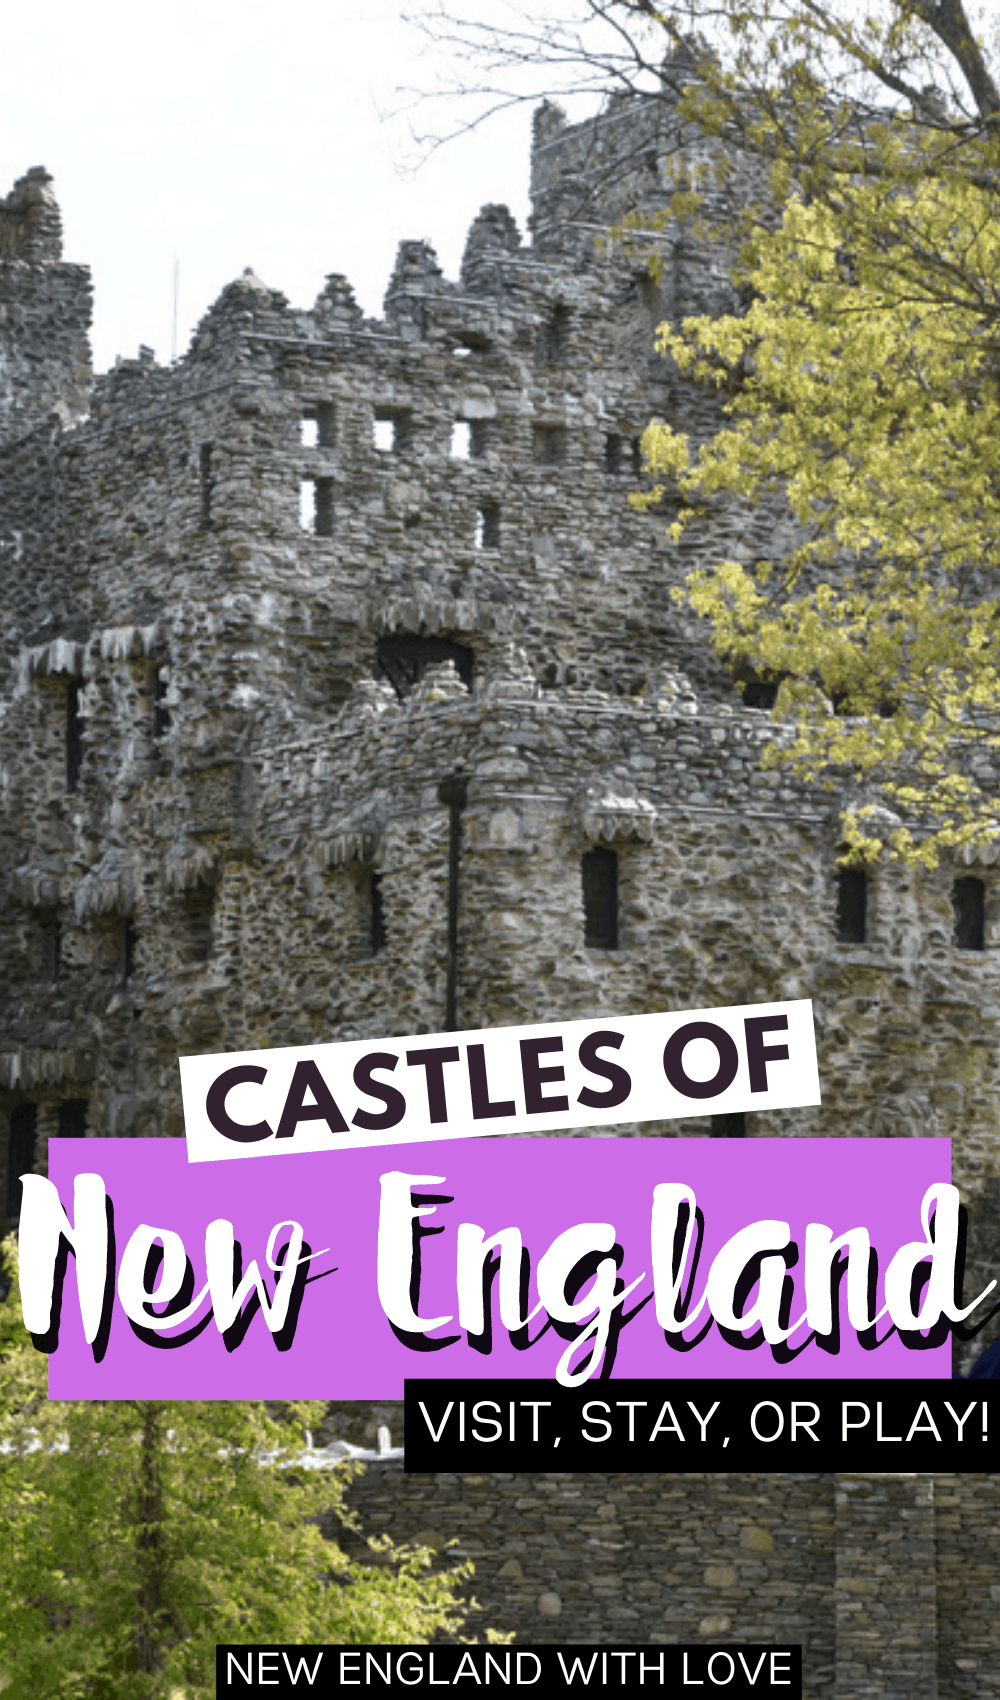 Pinterest graphic reading "CASTLES OF New England" with a photo of a stone castle